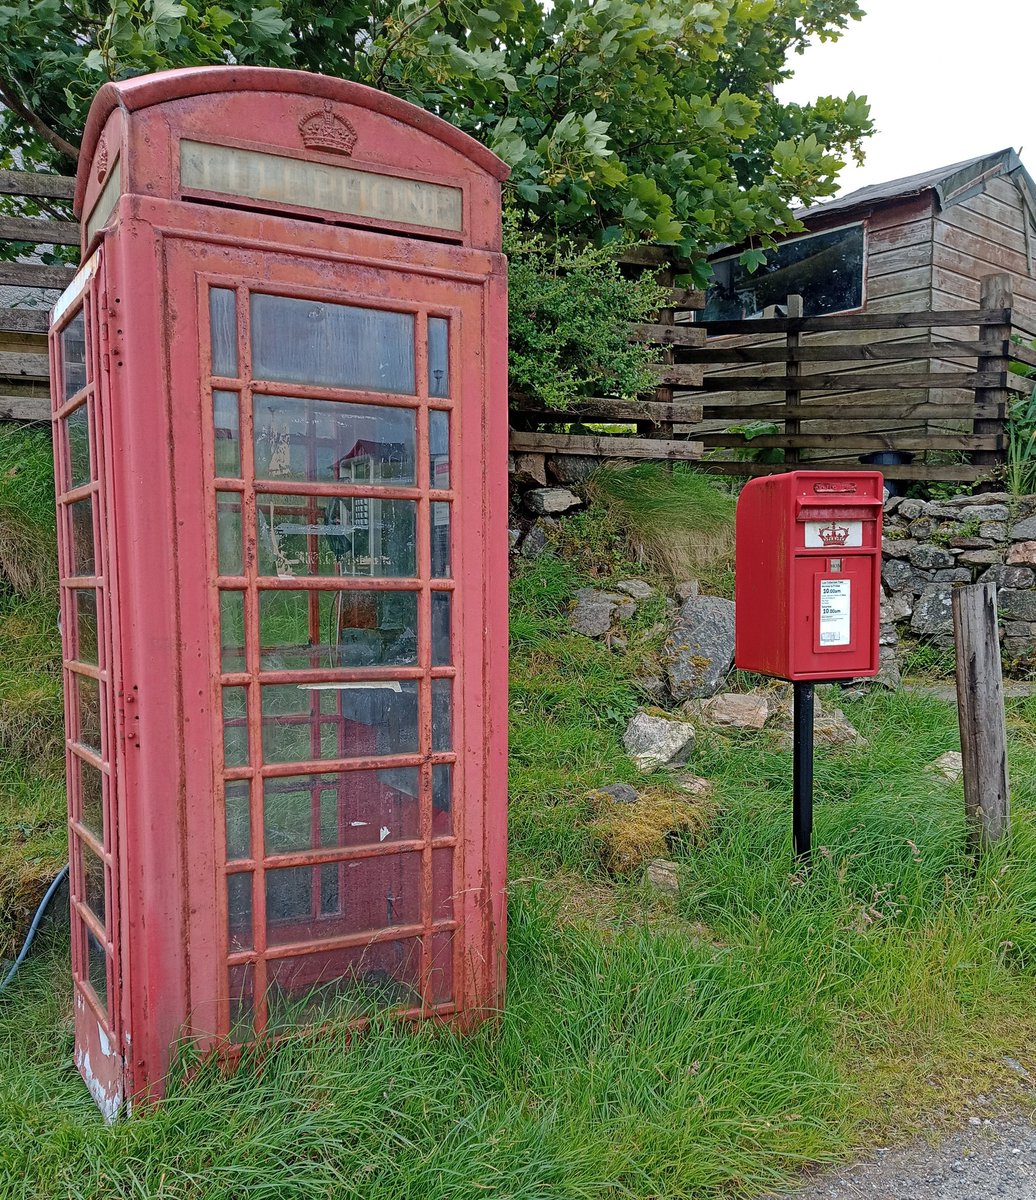 #postboxsaturday 
#Telephonebox
#Outerhebrides
2-4-1 today, the telephone in the box is in full working order!
Bhaltos, Isle of Lewis.